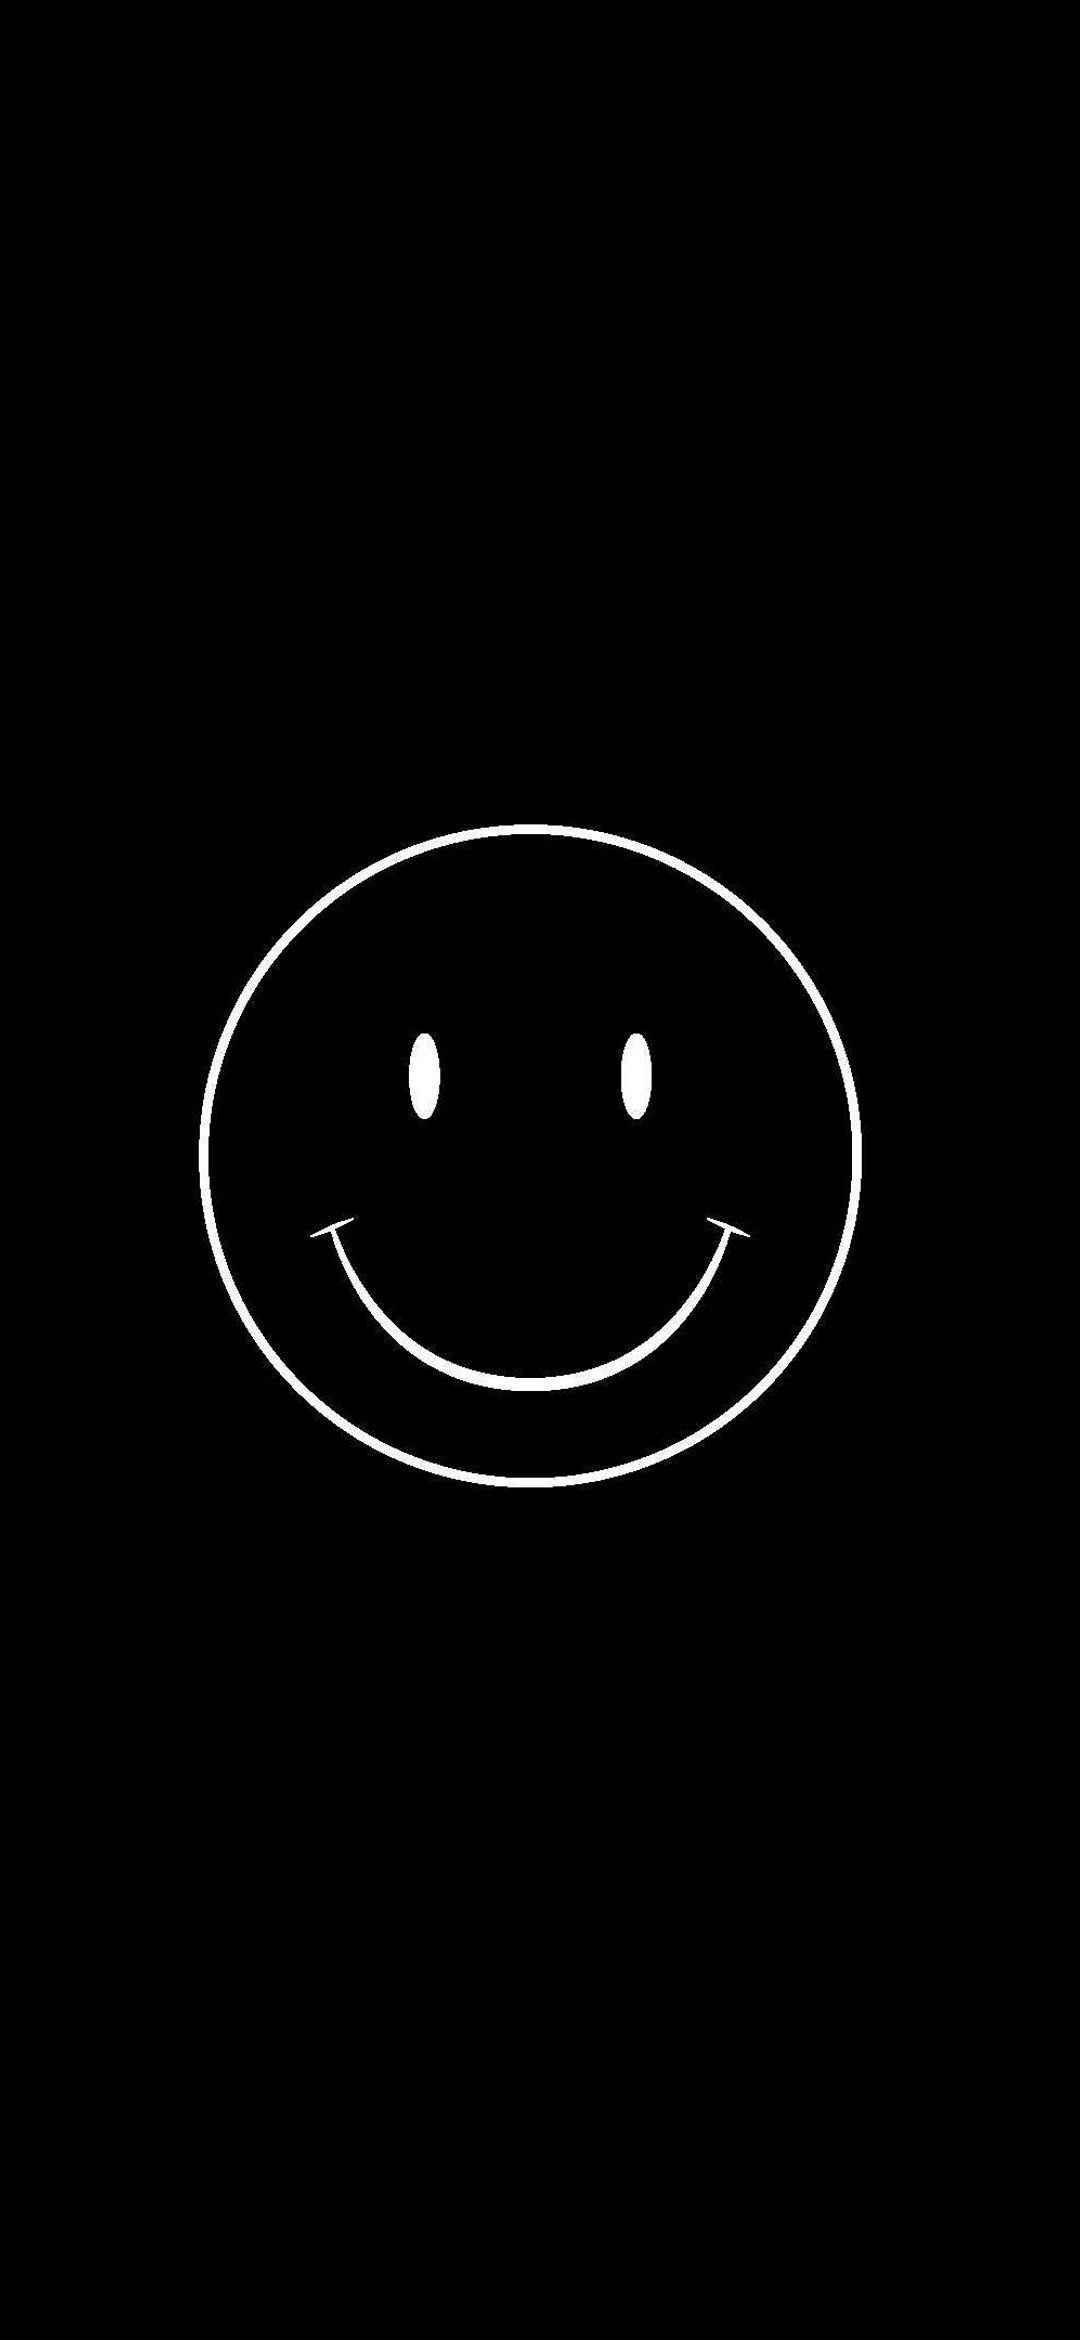 A white oval with a smiley face on a black background - Smile